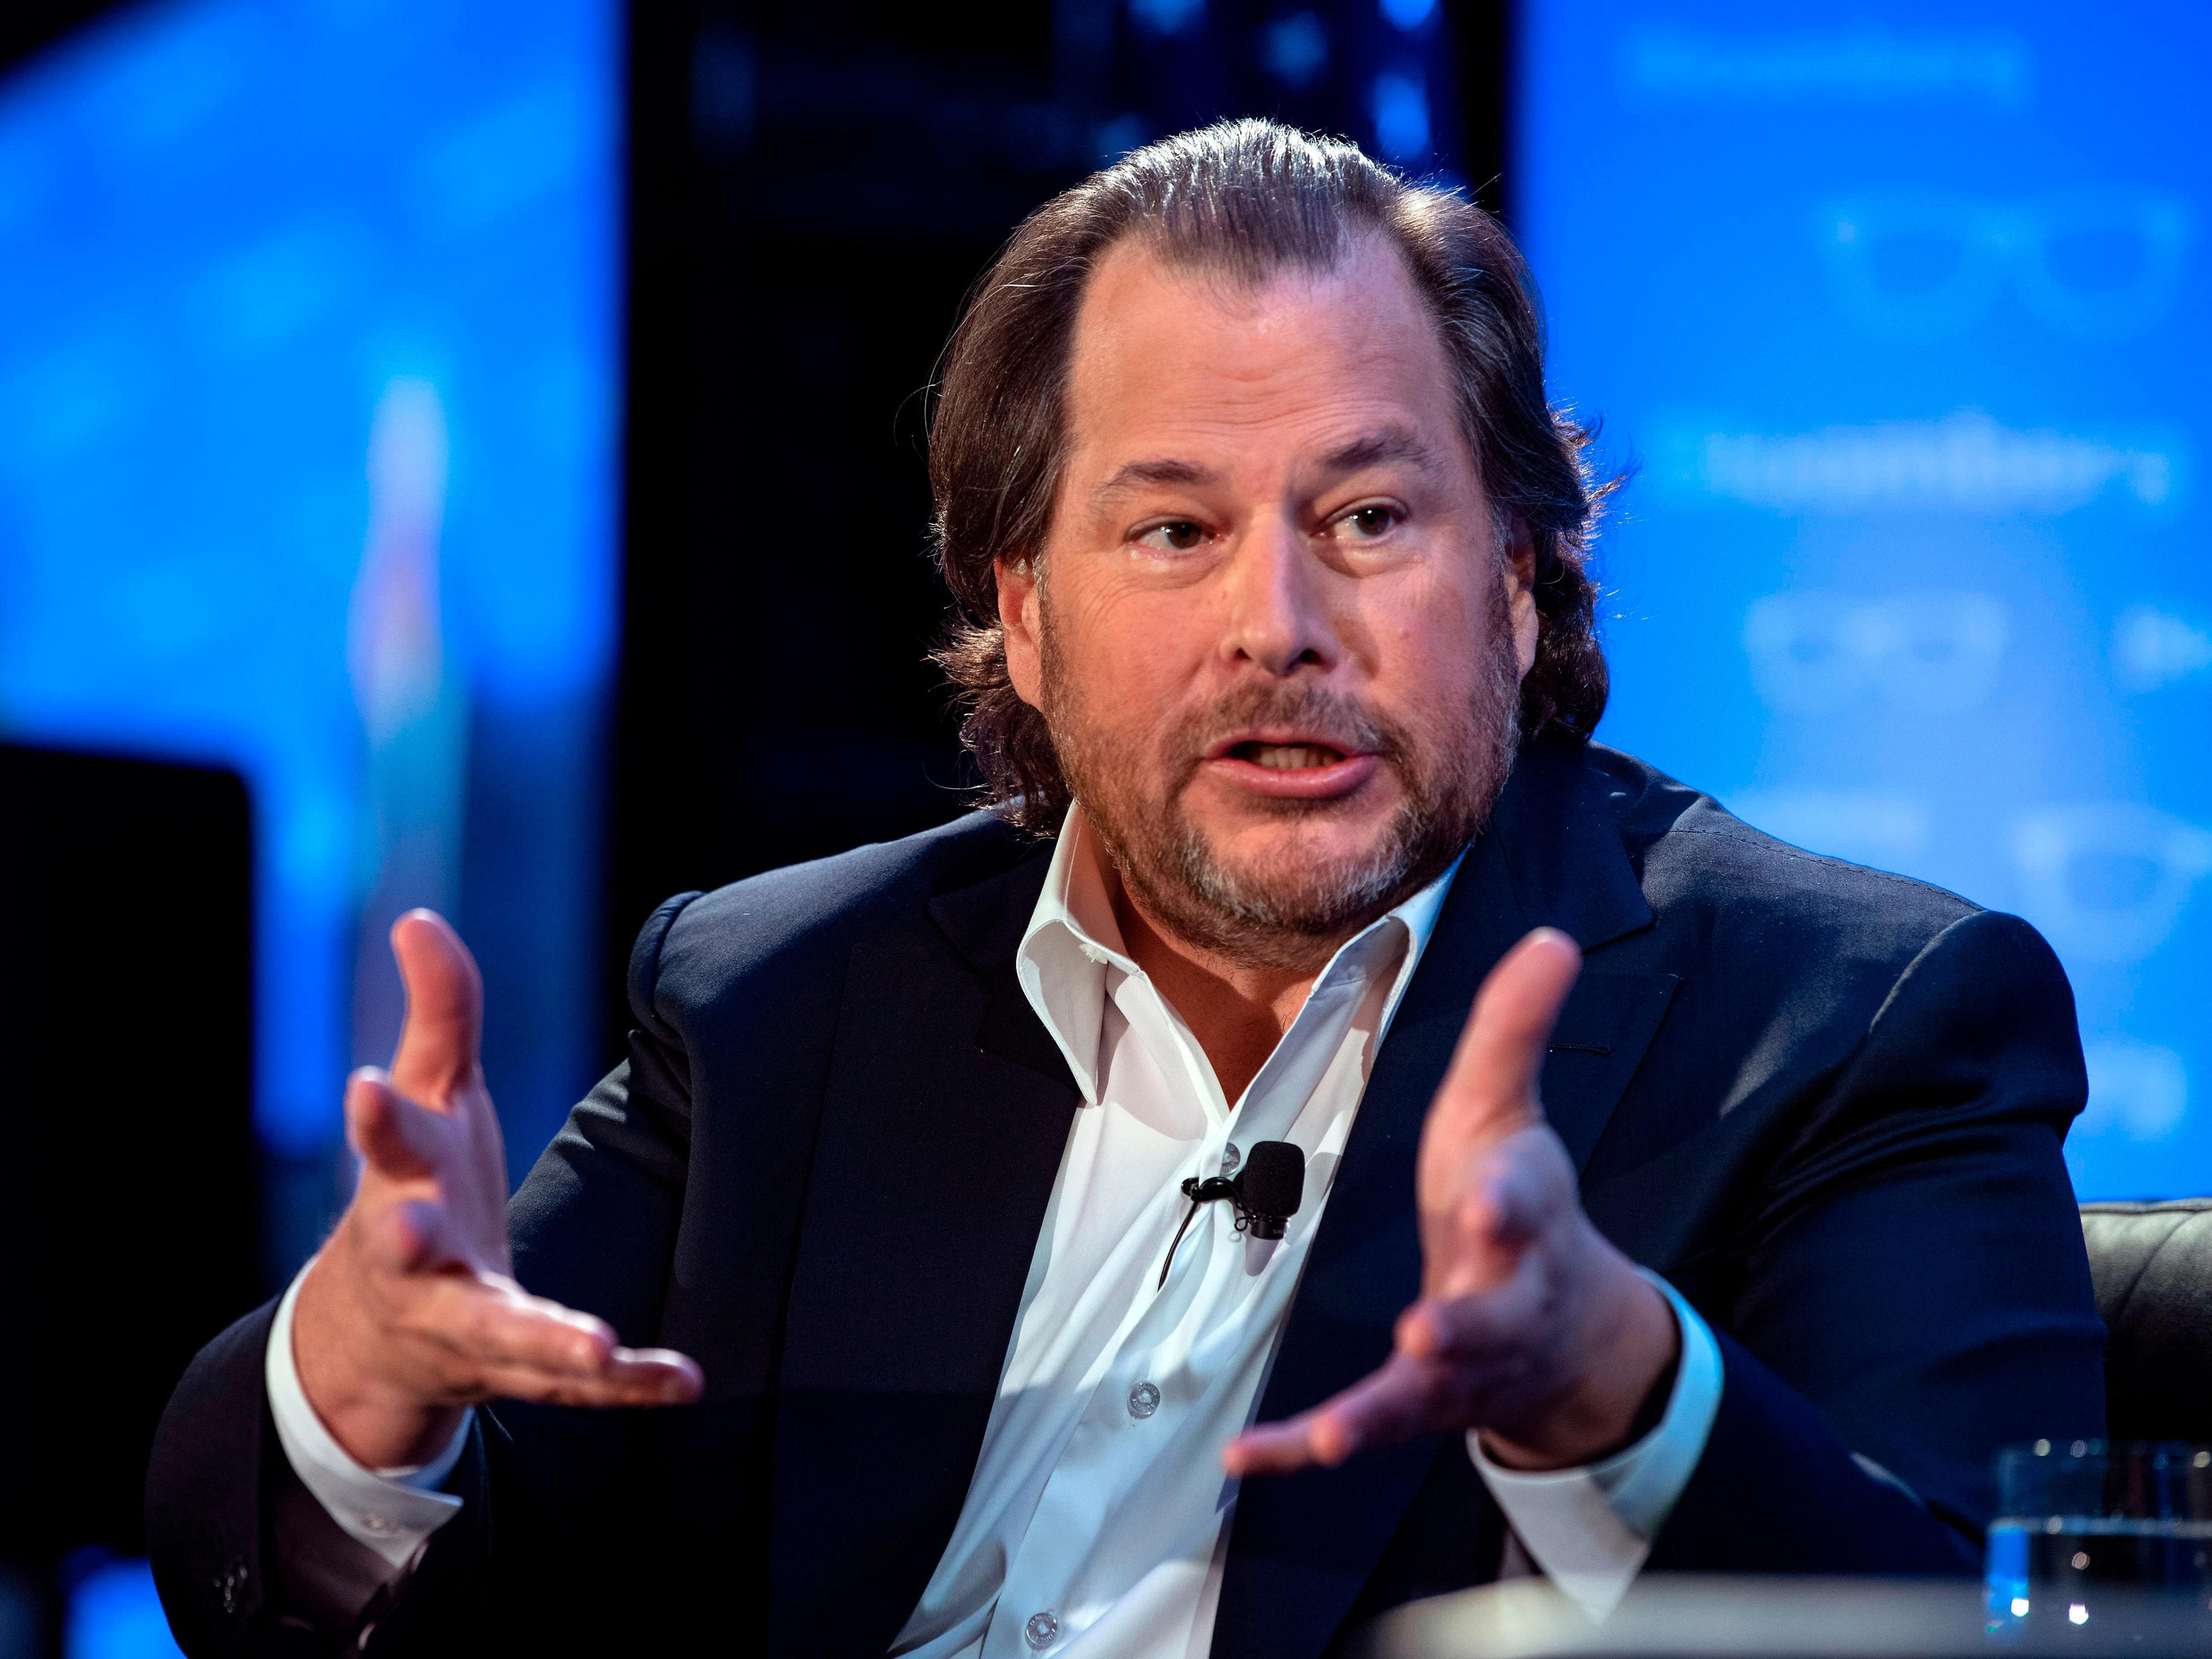 Salesforce employees are bracing for more layoffs amid the company's